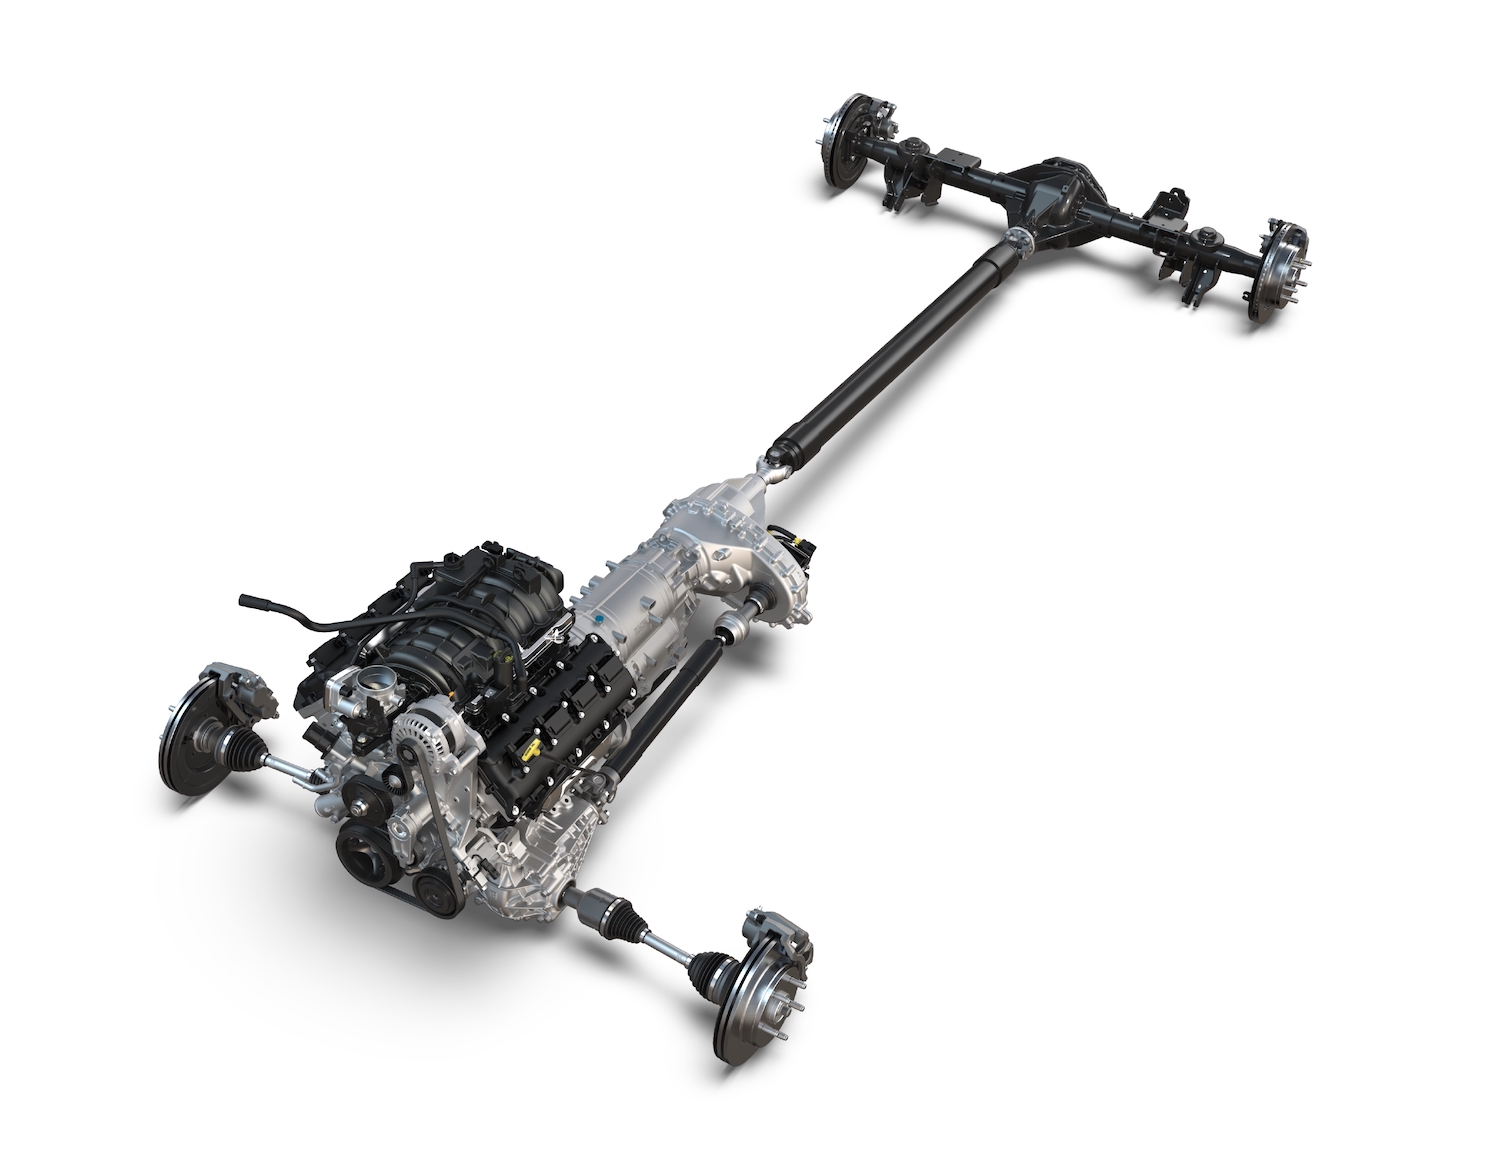 This is the isolated drivetrain of a Ram 1500 pickup truck with axles, transmission, and engine that sometimes suffers coolant leaks against a white backdrop.